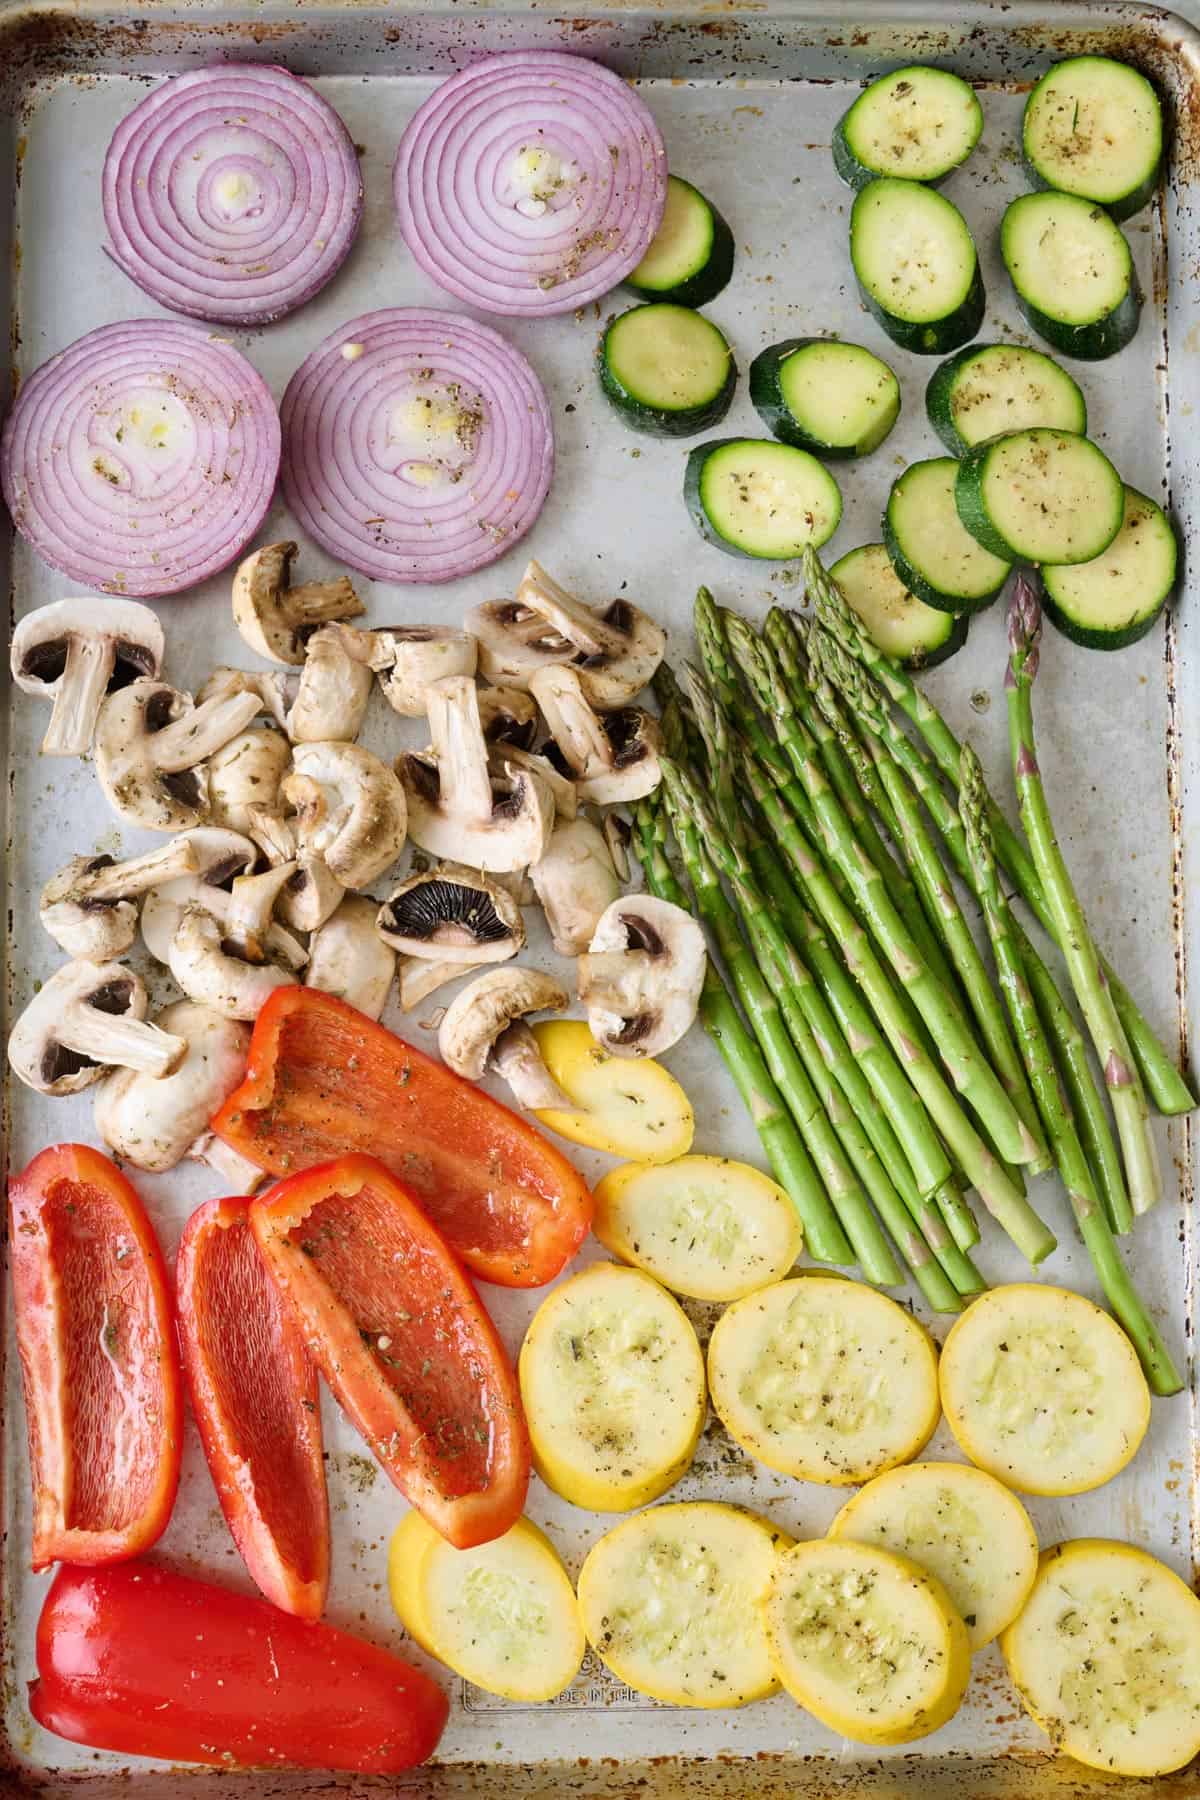 Oil and seasoning added to prepared vegetables for grilling.